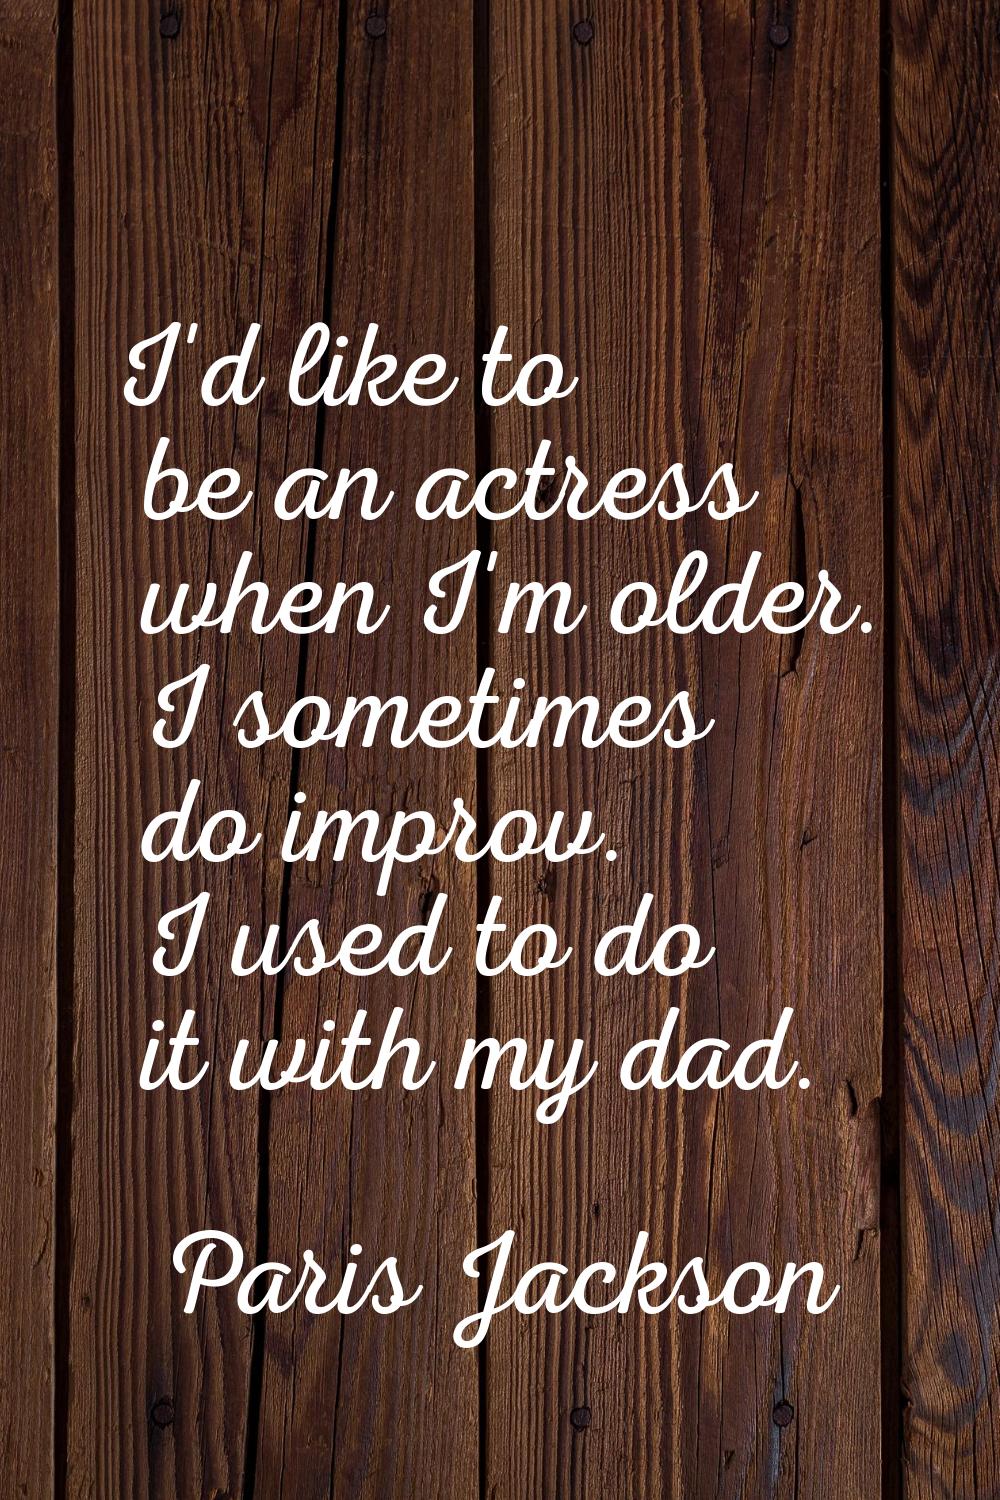 I'd like to be an actress when I'm older. I sometimes do improv. I used to do it with my dad.